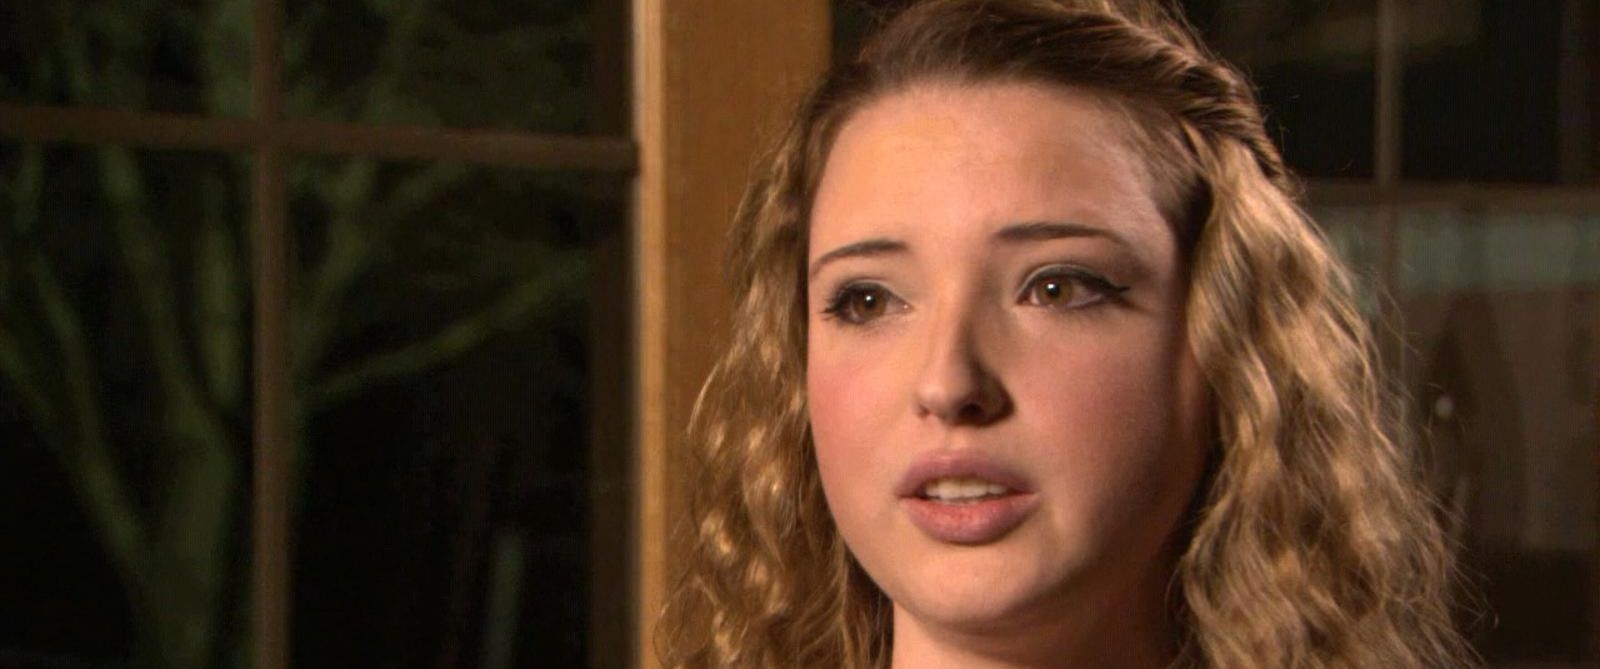 Victim of Marine Corps Nude Photo Scandal Speaks Out 